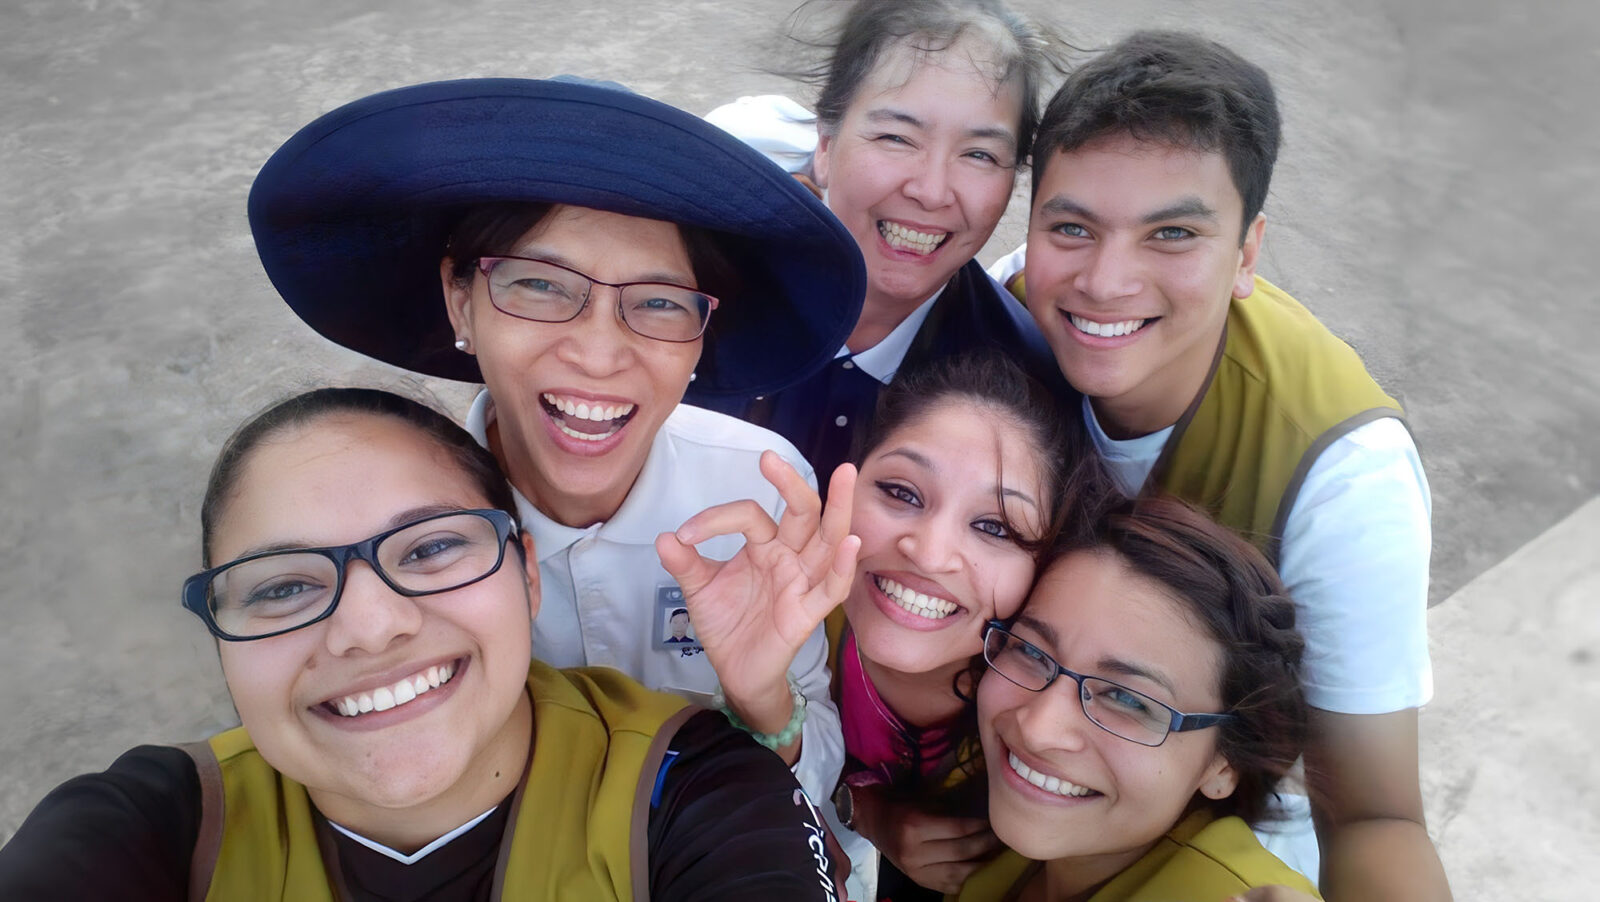 On March 16, 2015, the American Tzu Chi Medical Association and local Tzu Chi volunteers in Honduras held a free clinic together for the first time. Dentist Shirley Chen (second from left) takes a group photo with students from the local medical university volunteer group.